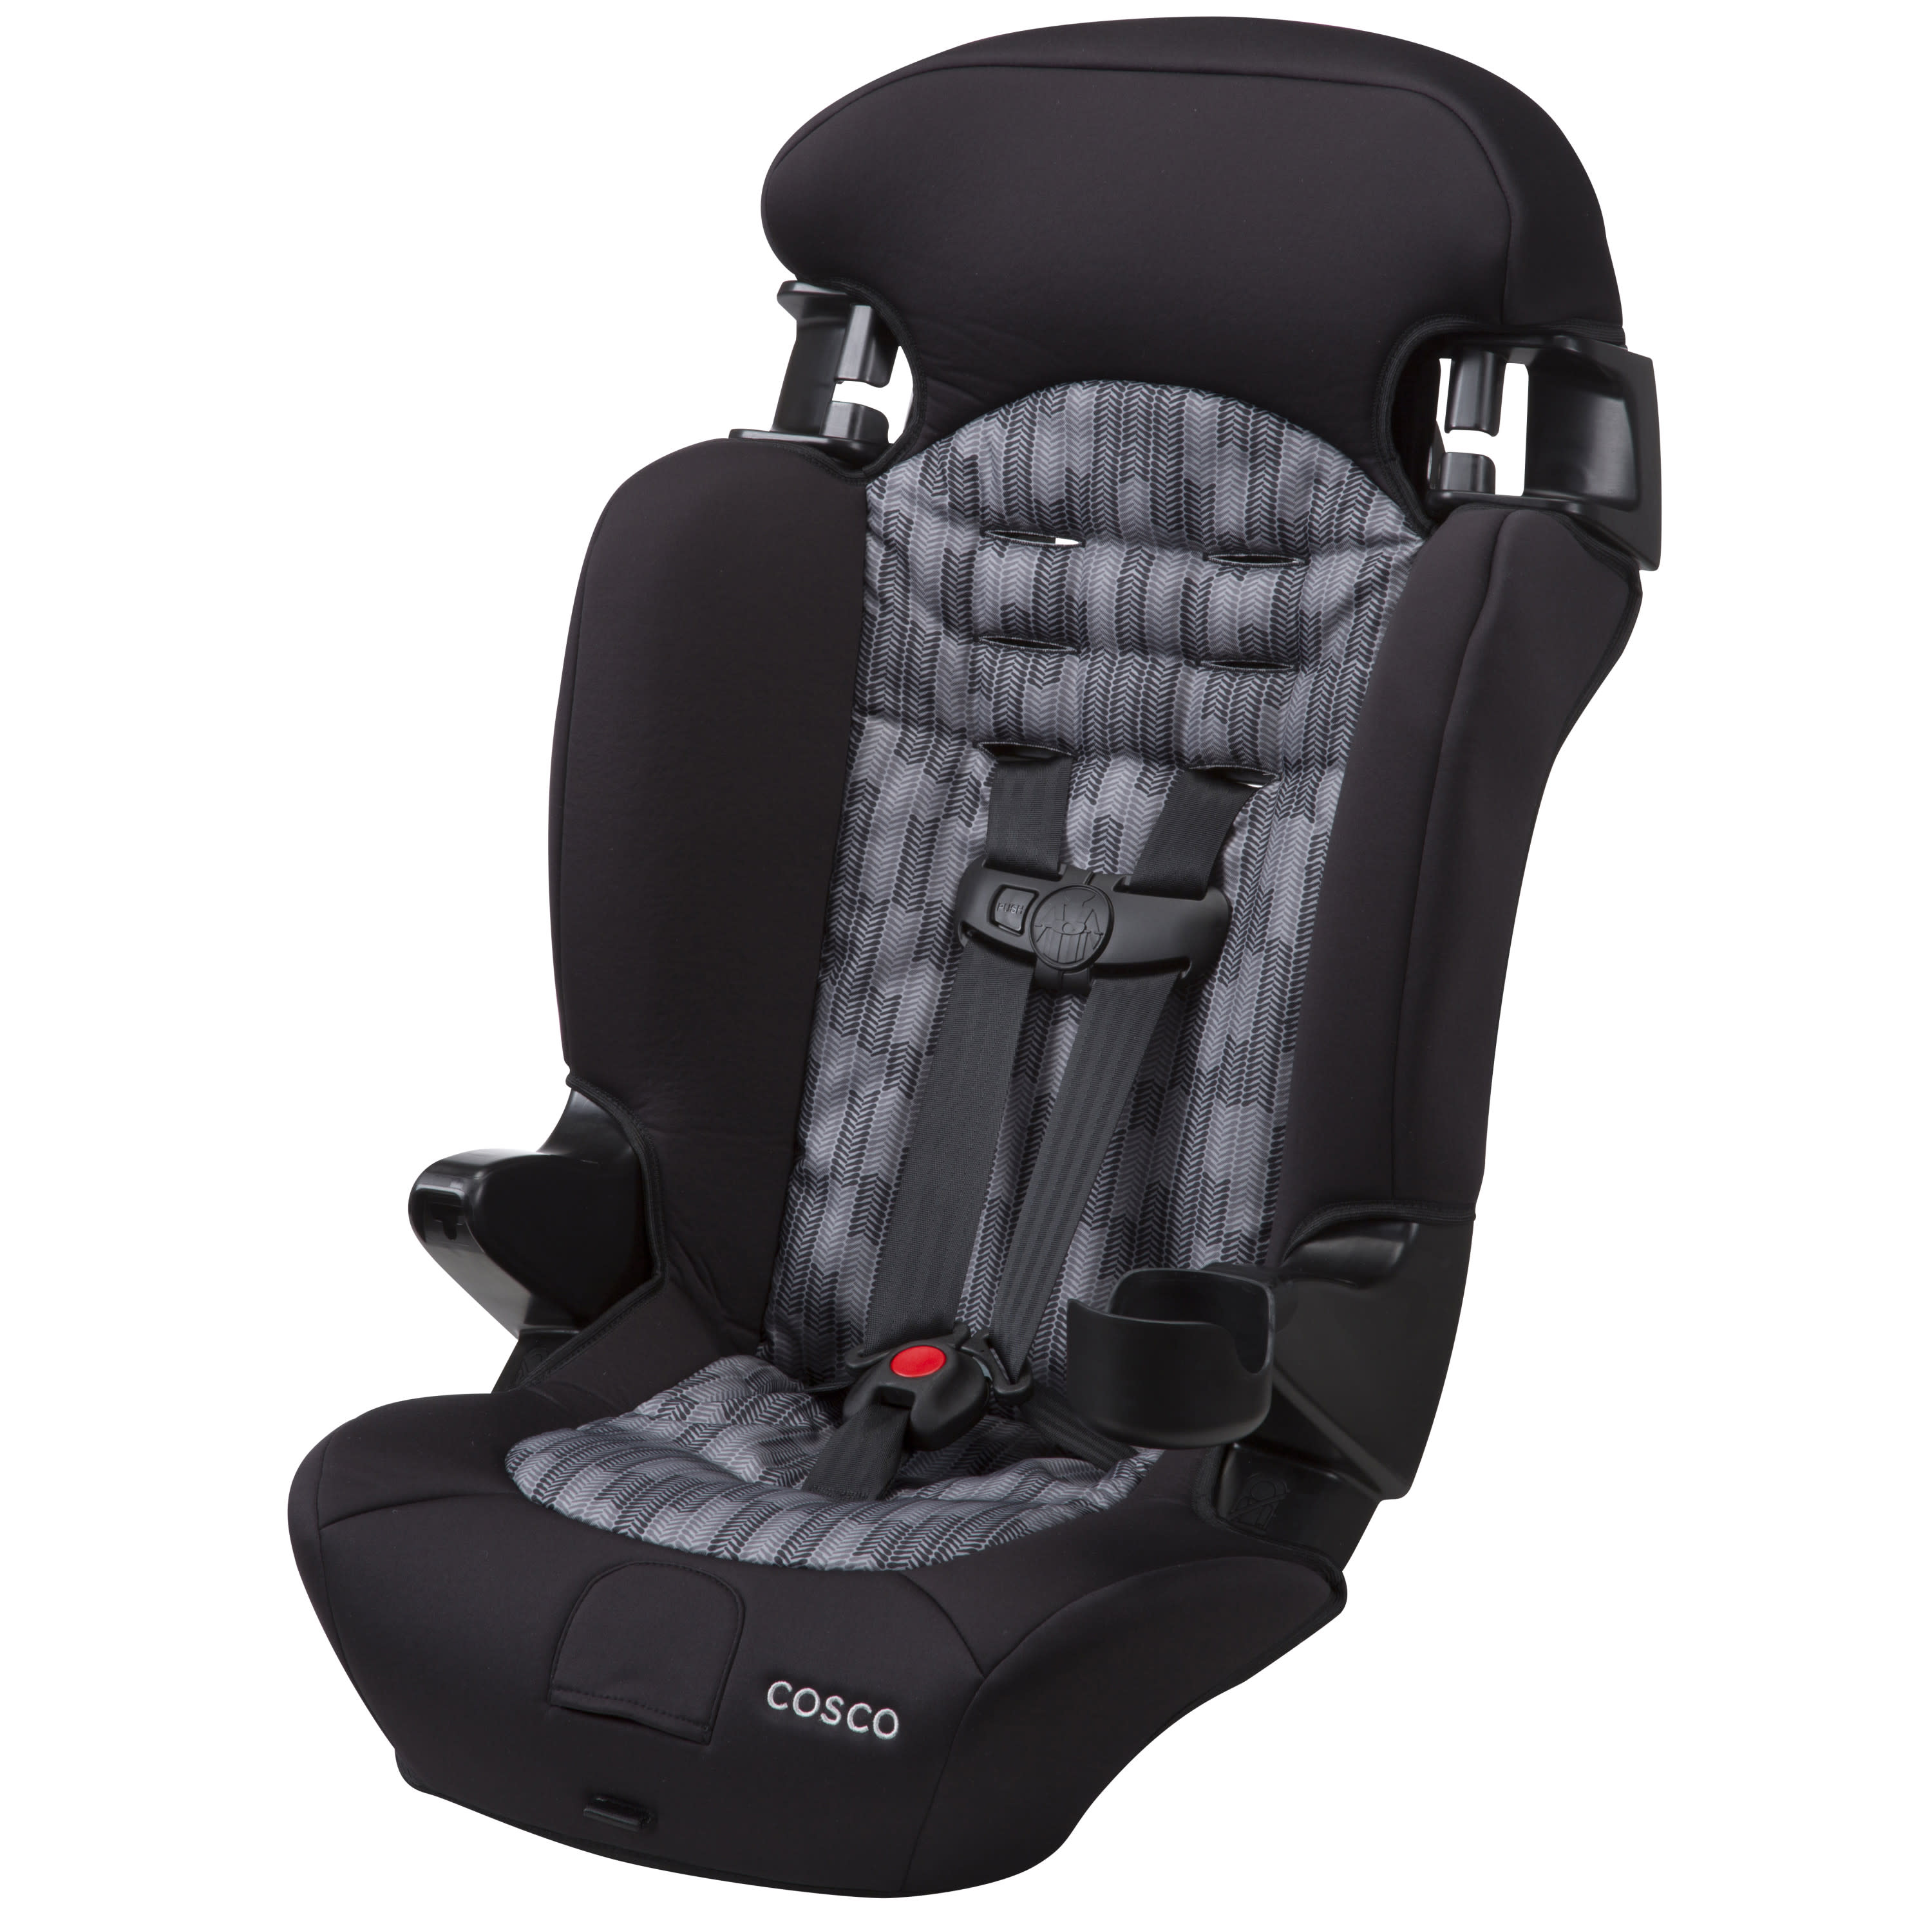 Cosco Finale 2-in-1 Booster Car Seat, Flight - image 4 of 17